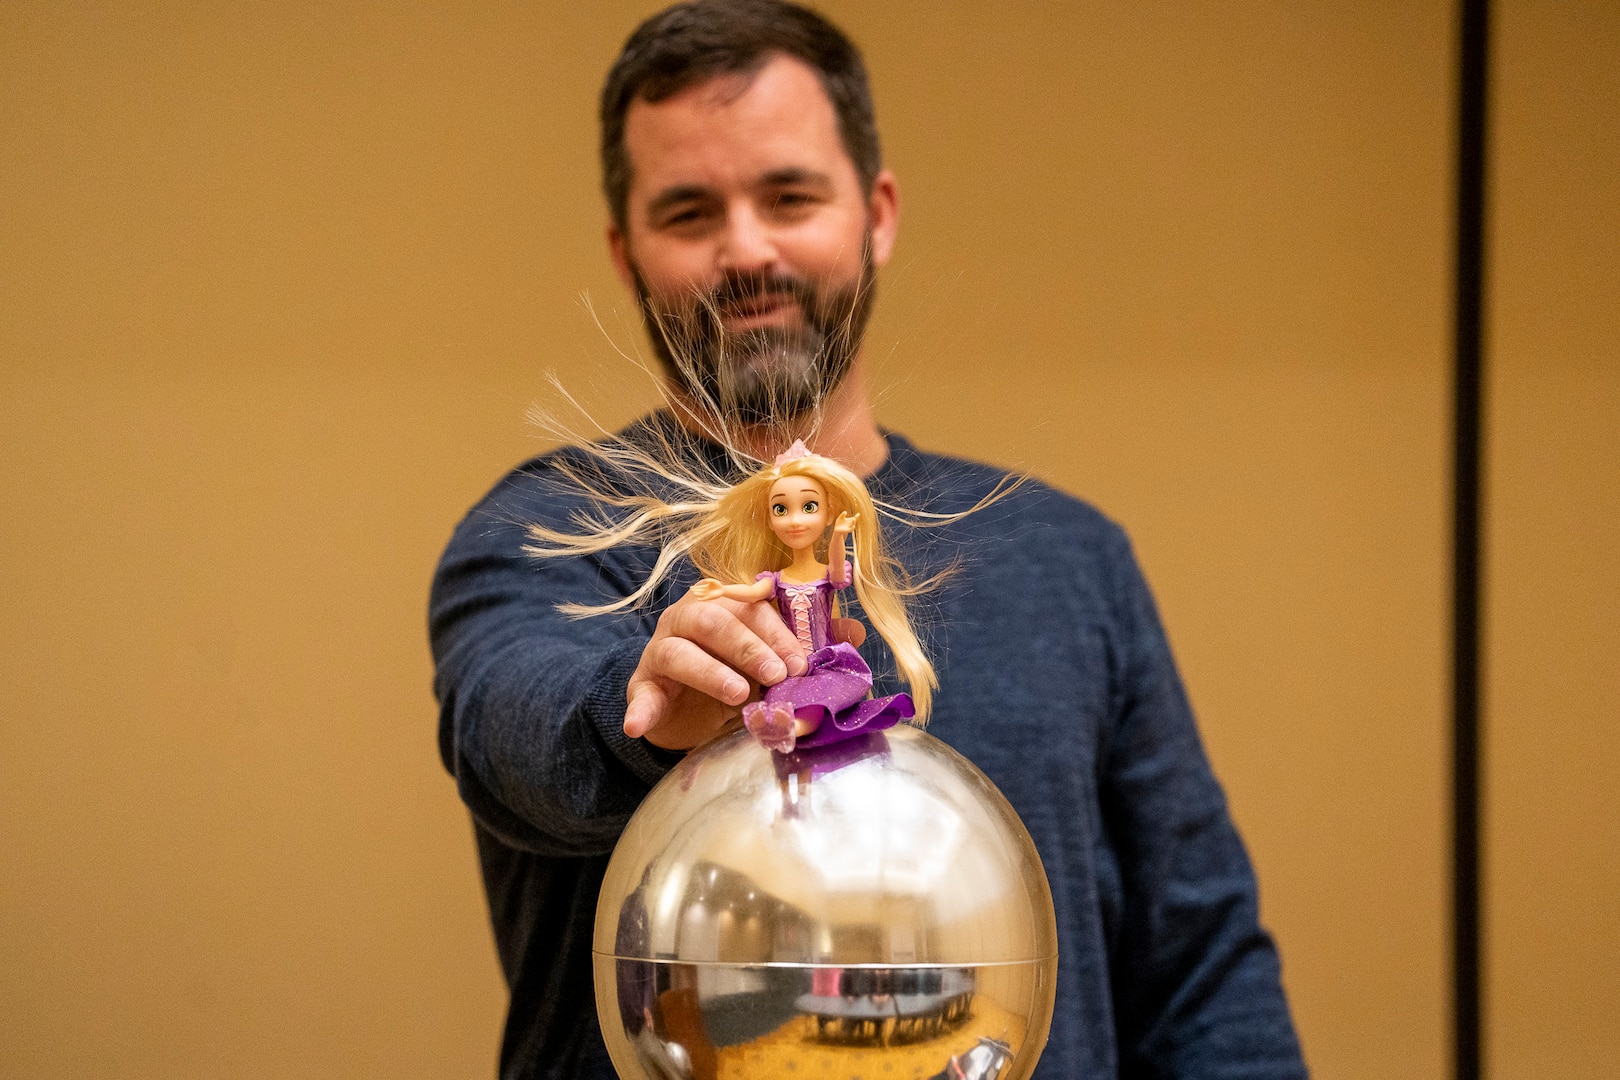 IMAGE: Naval Surface Warfare Center Dahlgren Division’s (NSWCDD) Michael Clark uses a Van De Graaff generator to demonstrate the effect of static electricity on the hair of a Rapunzel doll. Clark joined other NSWCDD personnel in providing STEM-related presentations to Harrison Road Elementary School fifth graders during their field trip to the University of Mary Washington.